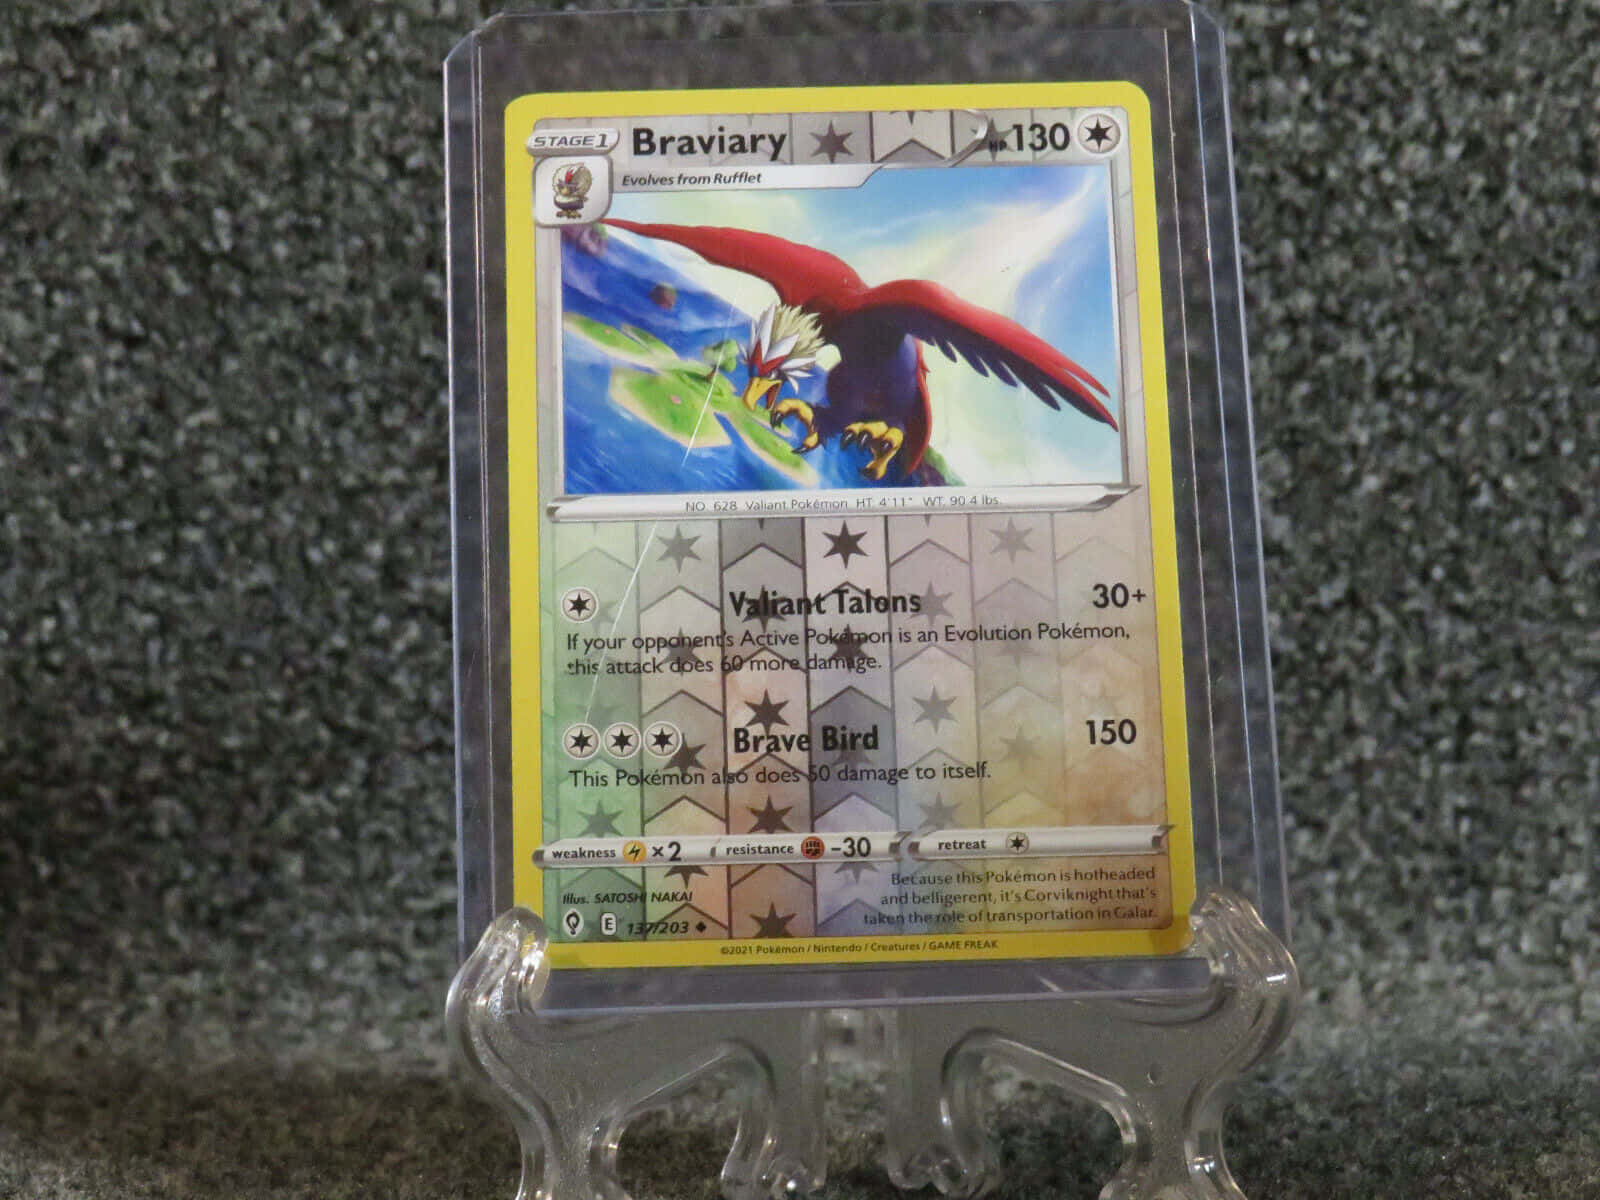 Braviary Pokémon Card With Clear Casing Wallpaper